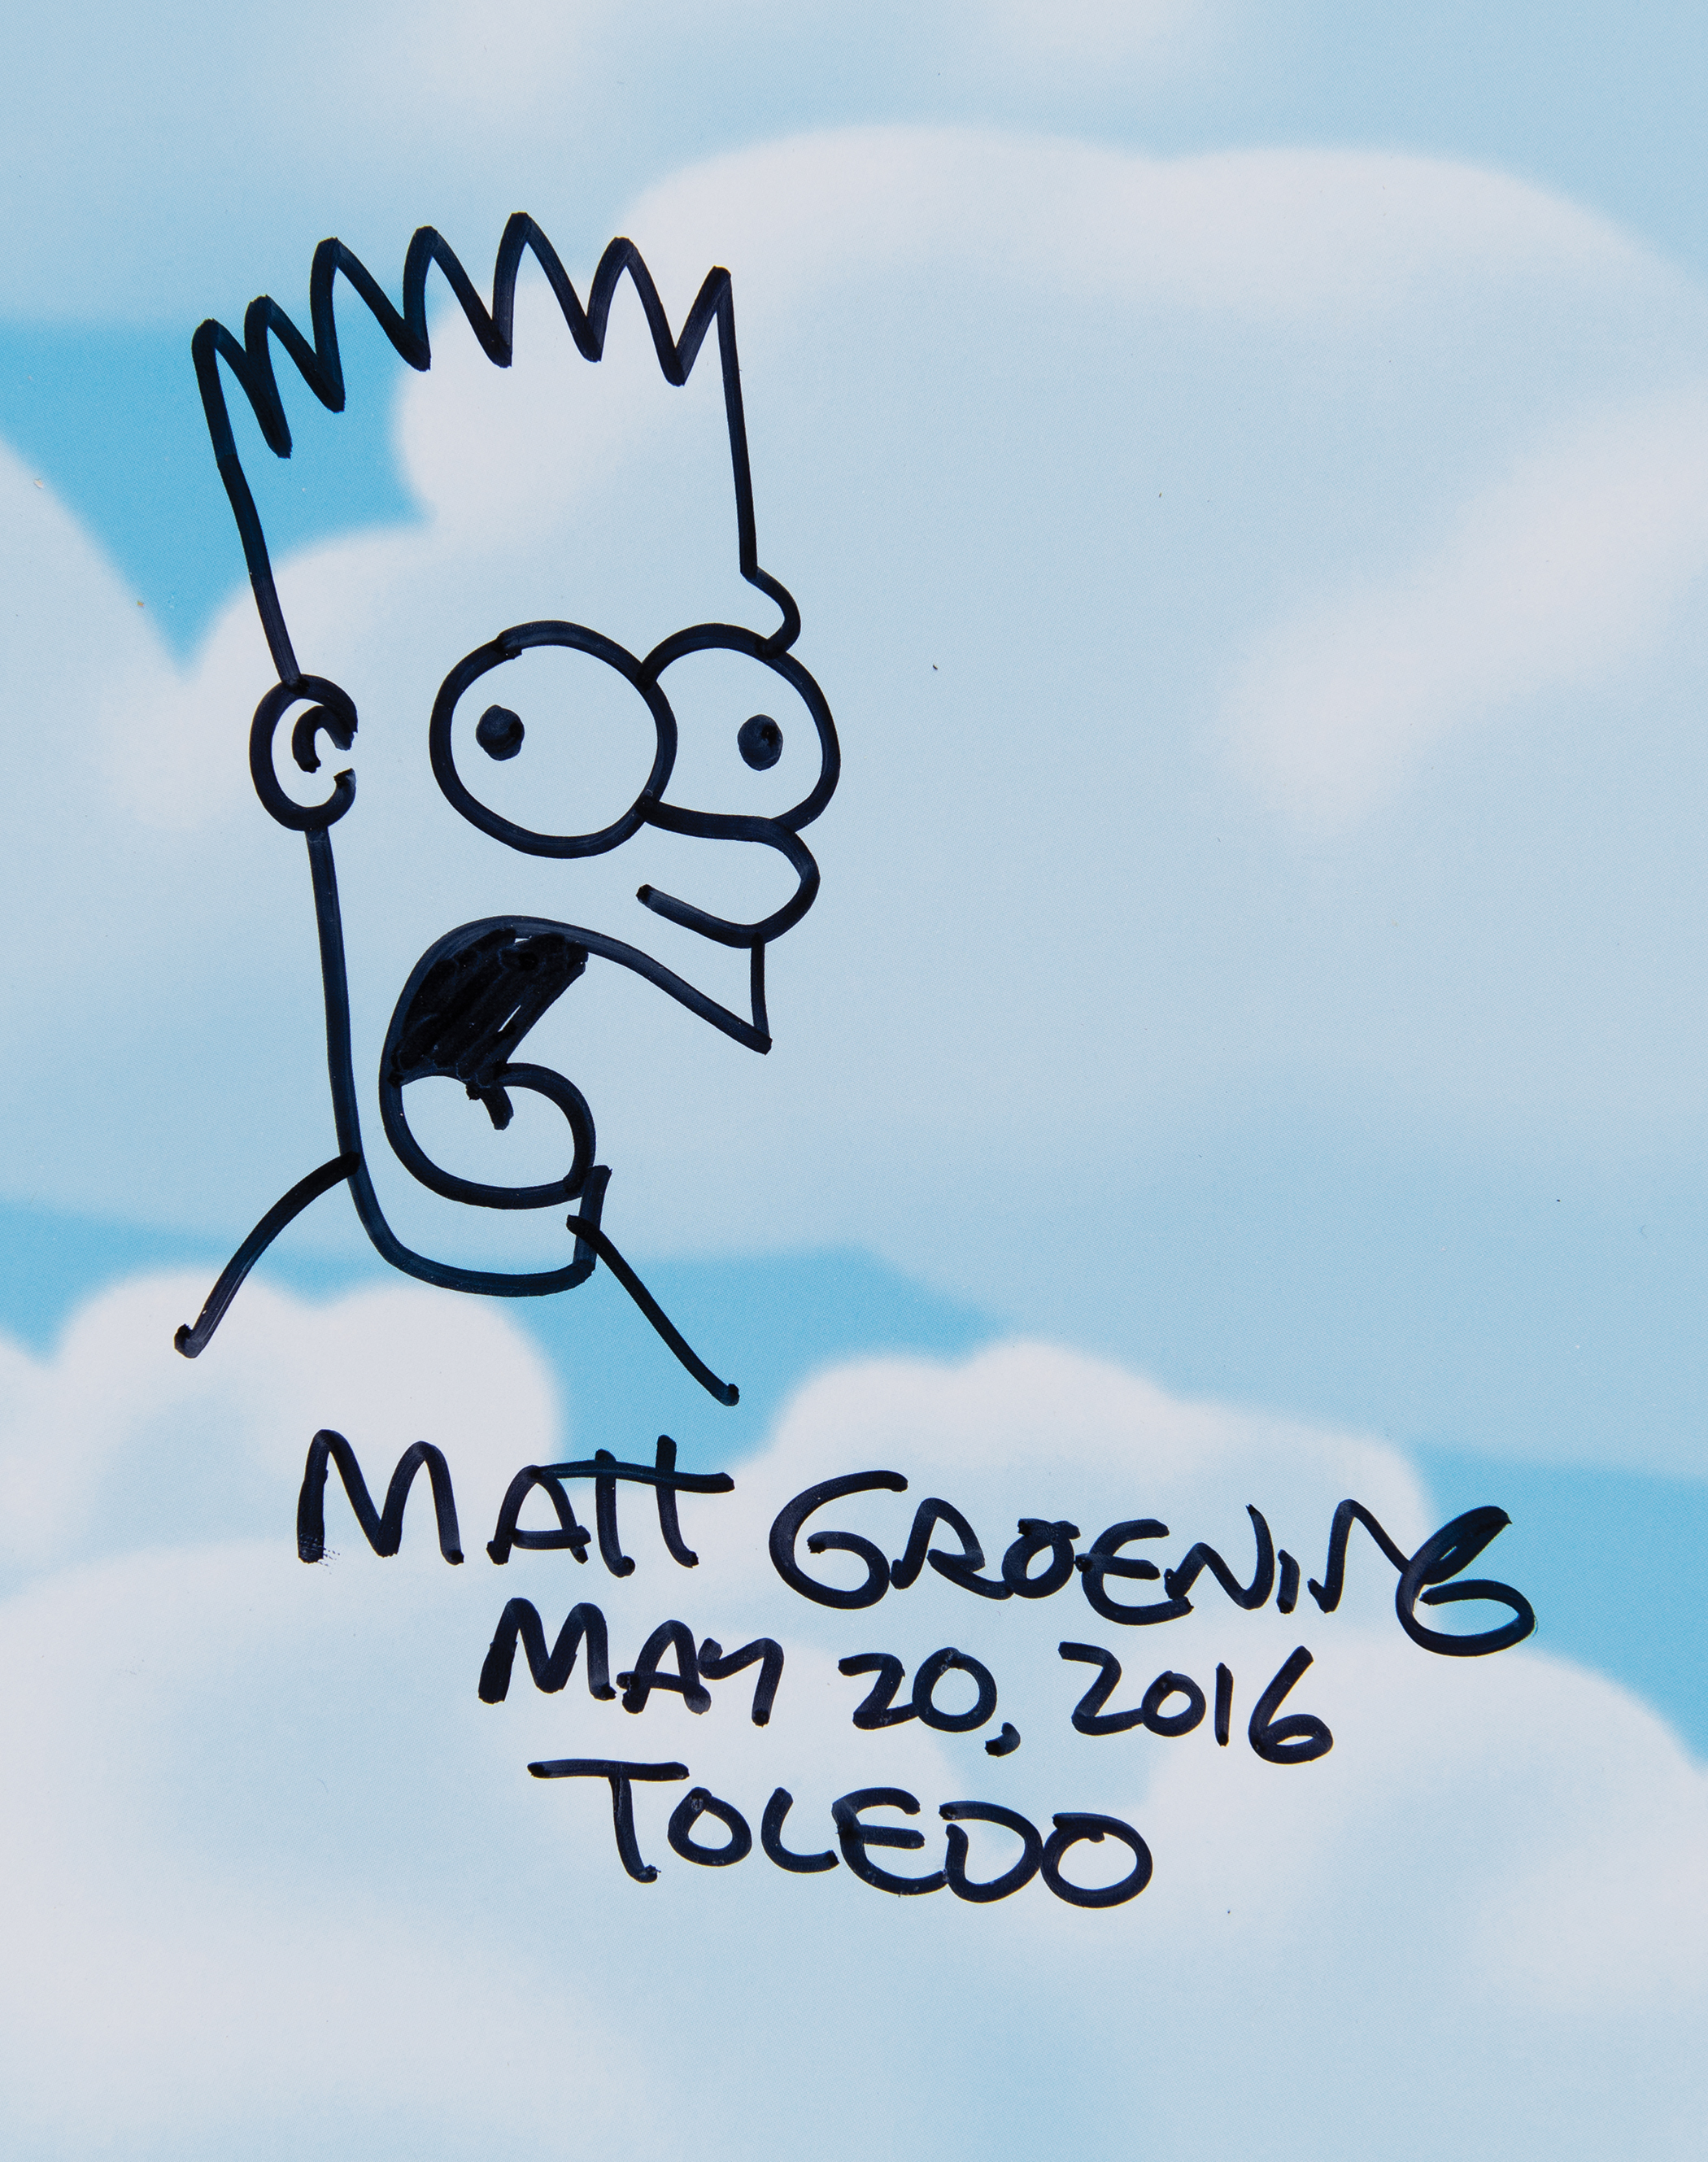 Lot #568 Matt Groening Signed Book with 'Bart Simpson' Sketch - Image 2